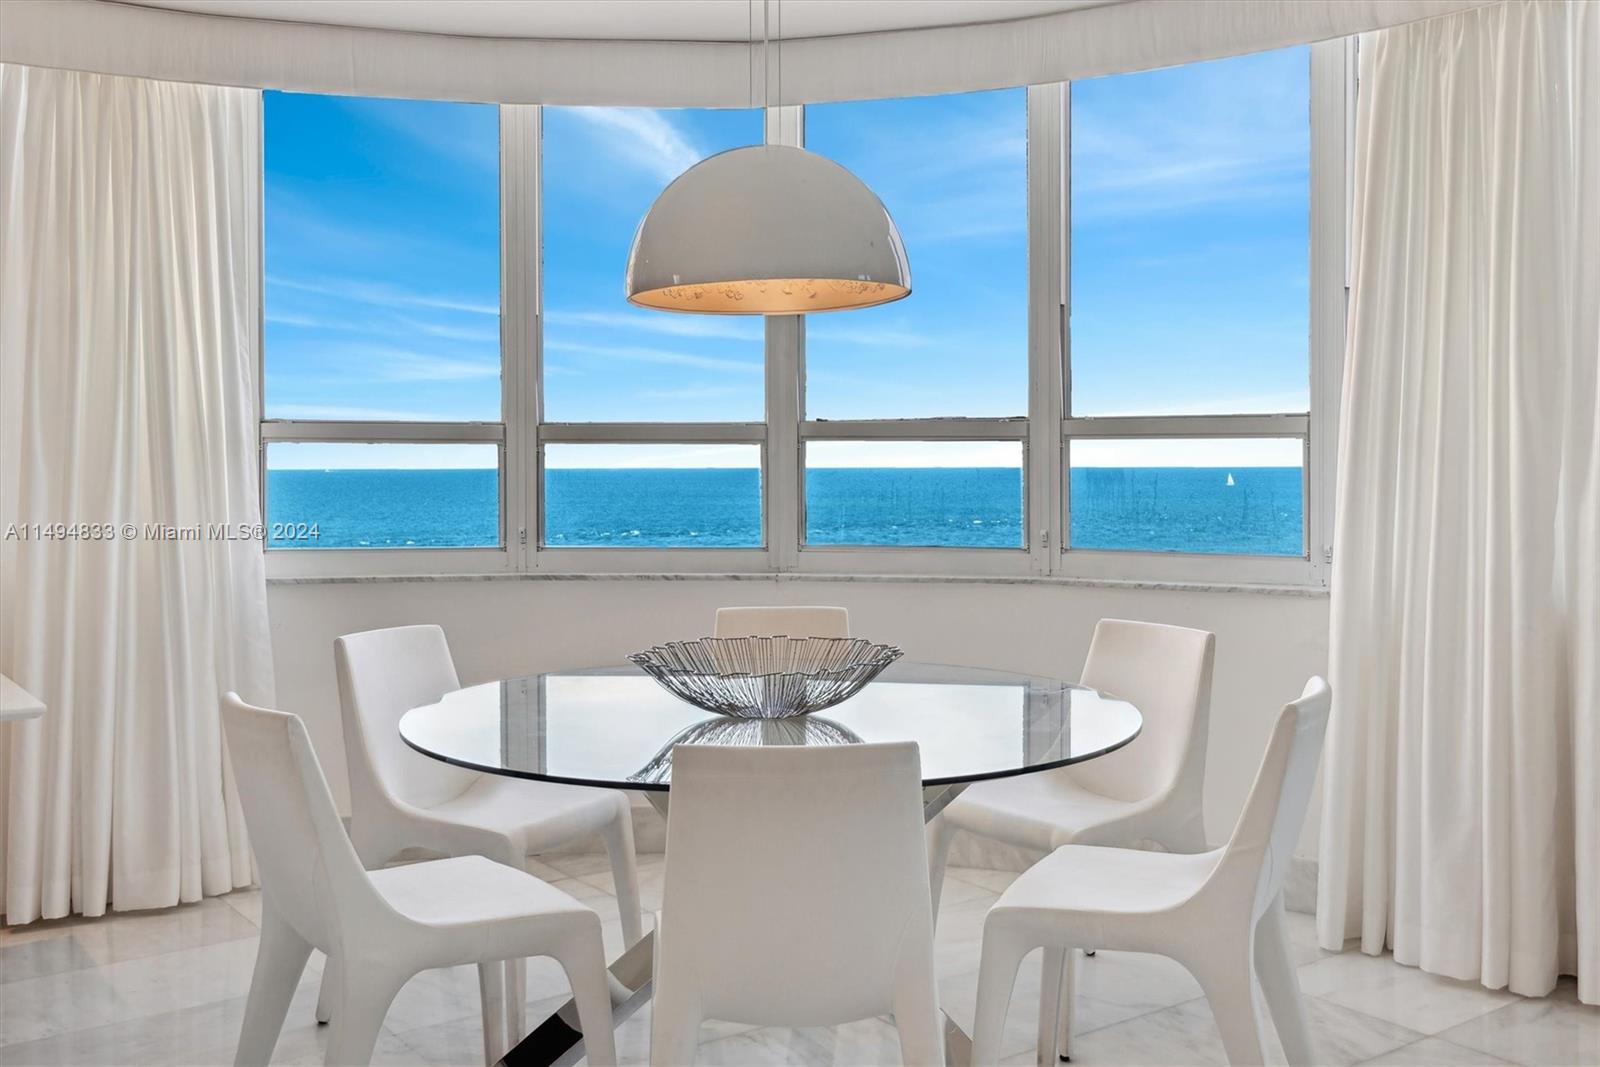 Exceptional Oceanfront Living! This 2,353 sq ft corner residence at Tiffany condo in Bal Harbour boasts a direct oceanfront view. Revel in luxury with marble and wood floors in the bedrooms within this 3-bed, 3.5-bath gem. Two balconies offer breathtaking ocean vistas, while the spacious master bedroom ensures ultimate comfort. Plus, enjoy the convenience of two parking spaces. Experience the newly renovated lobby, party room, community room, and theater room. This is the only direct oceanfront property in Bal Harbour at this unbeatable price point—blocks from the world-famous Bal Harbour Shops, offering elite shopping and dining experiences. Don't miss out on this rare opportunity! Partially Furnished!